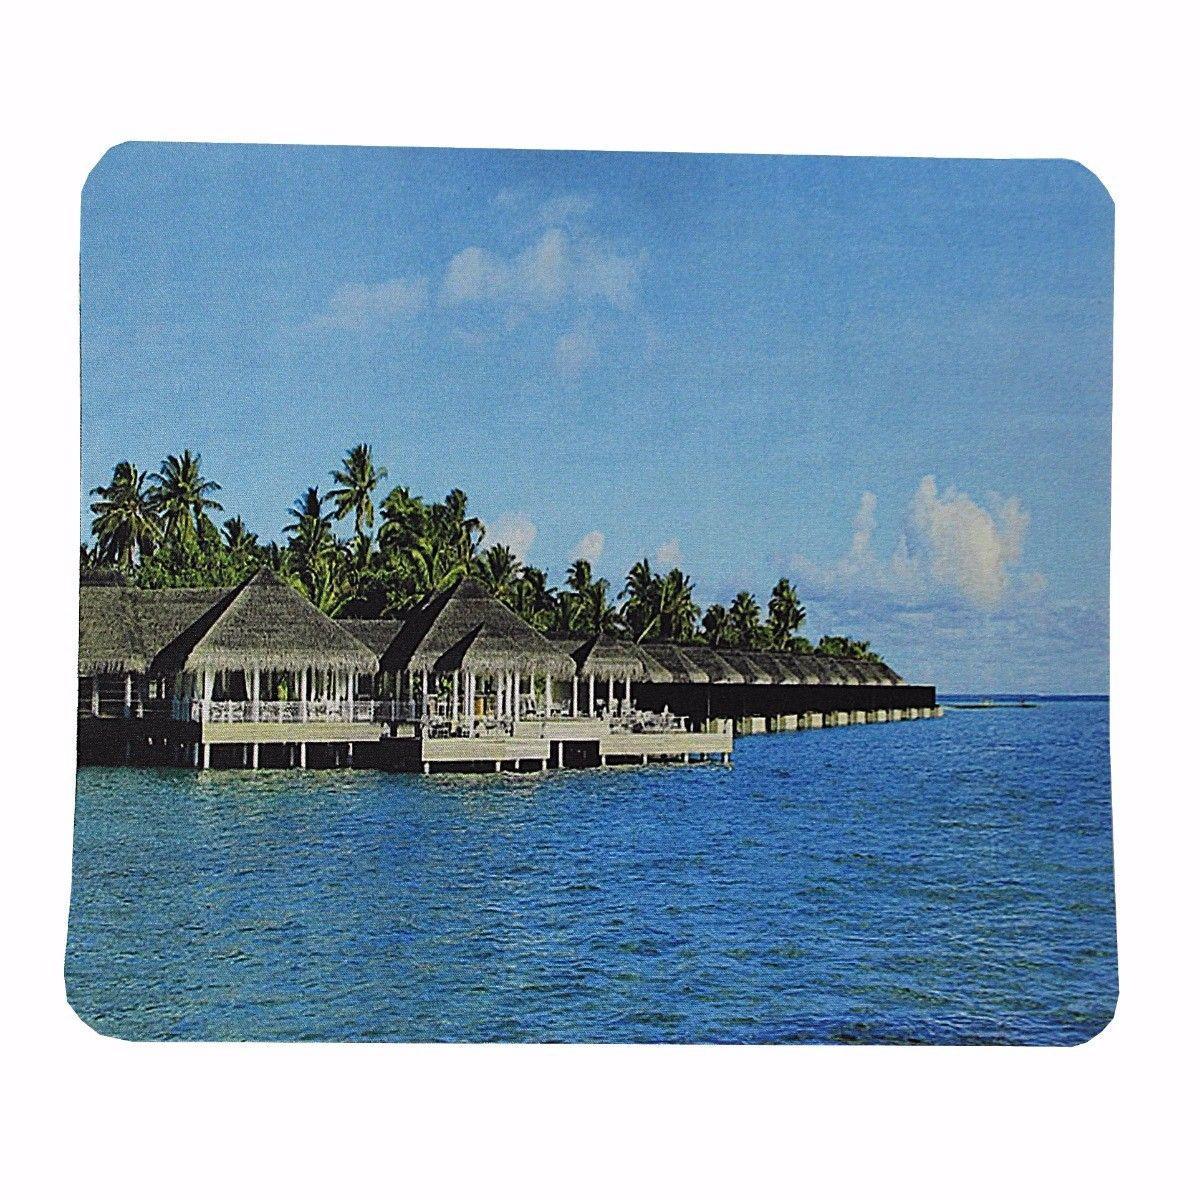 Mouse Mat Pad with Printed Design 28.5 x 24.5 cm Assorted Designs 4059 (Large Letter Rate)